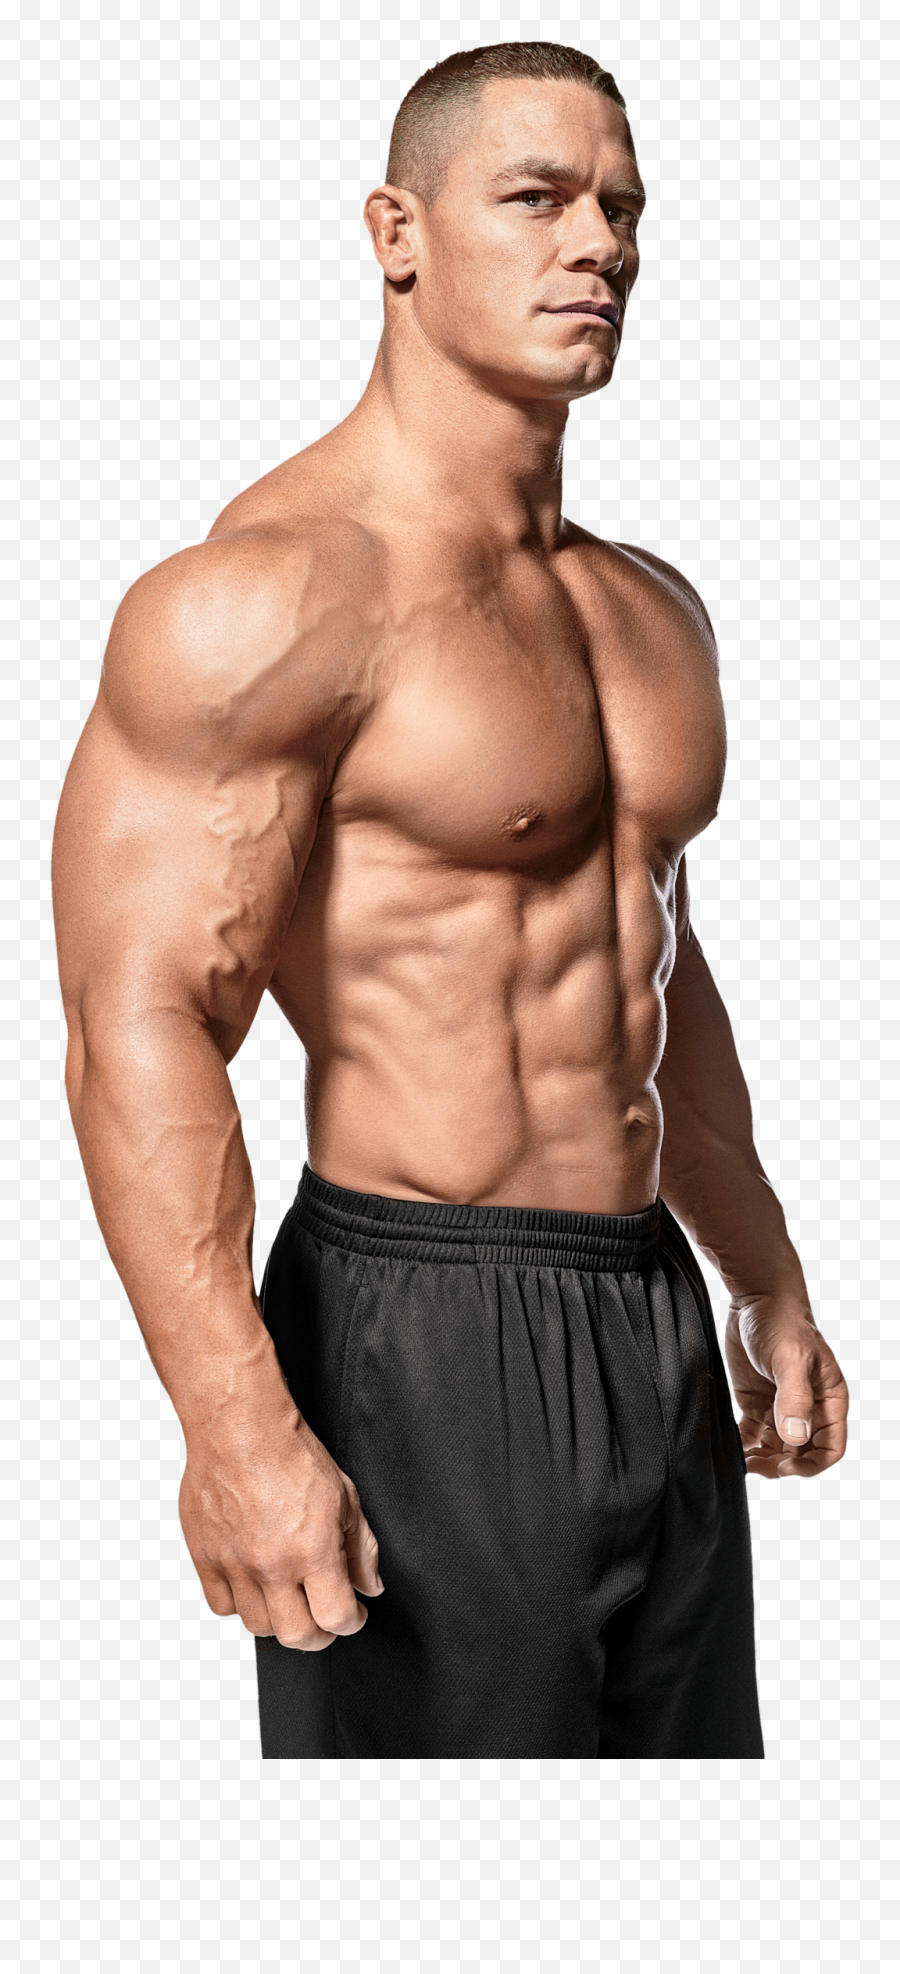 Muscle And Fitness Transparent U0026 Png Clipart Free Download - Ywd John Cena Body Building,Cena Png